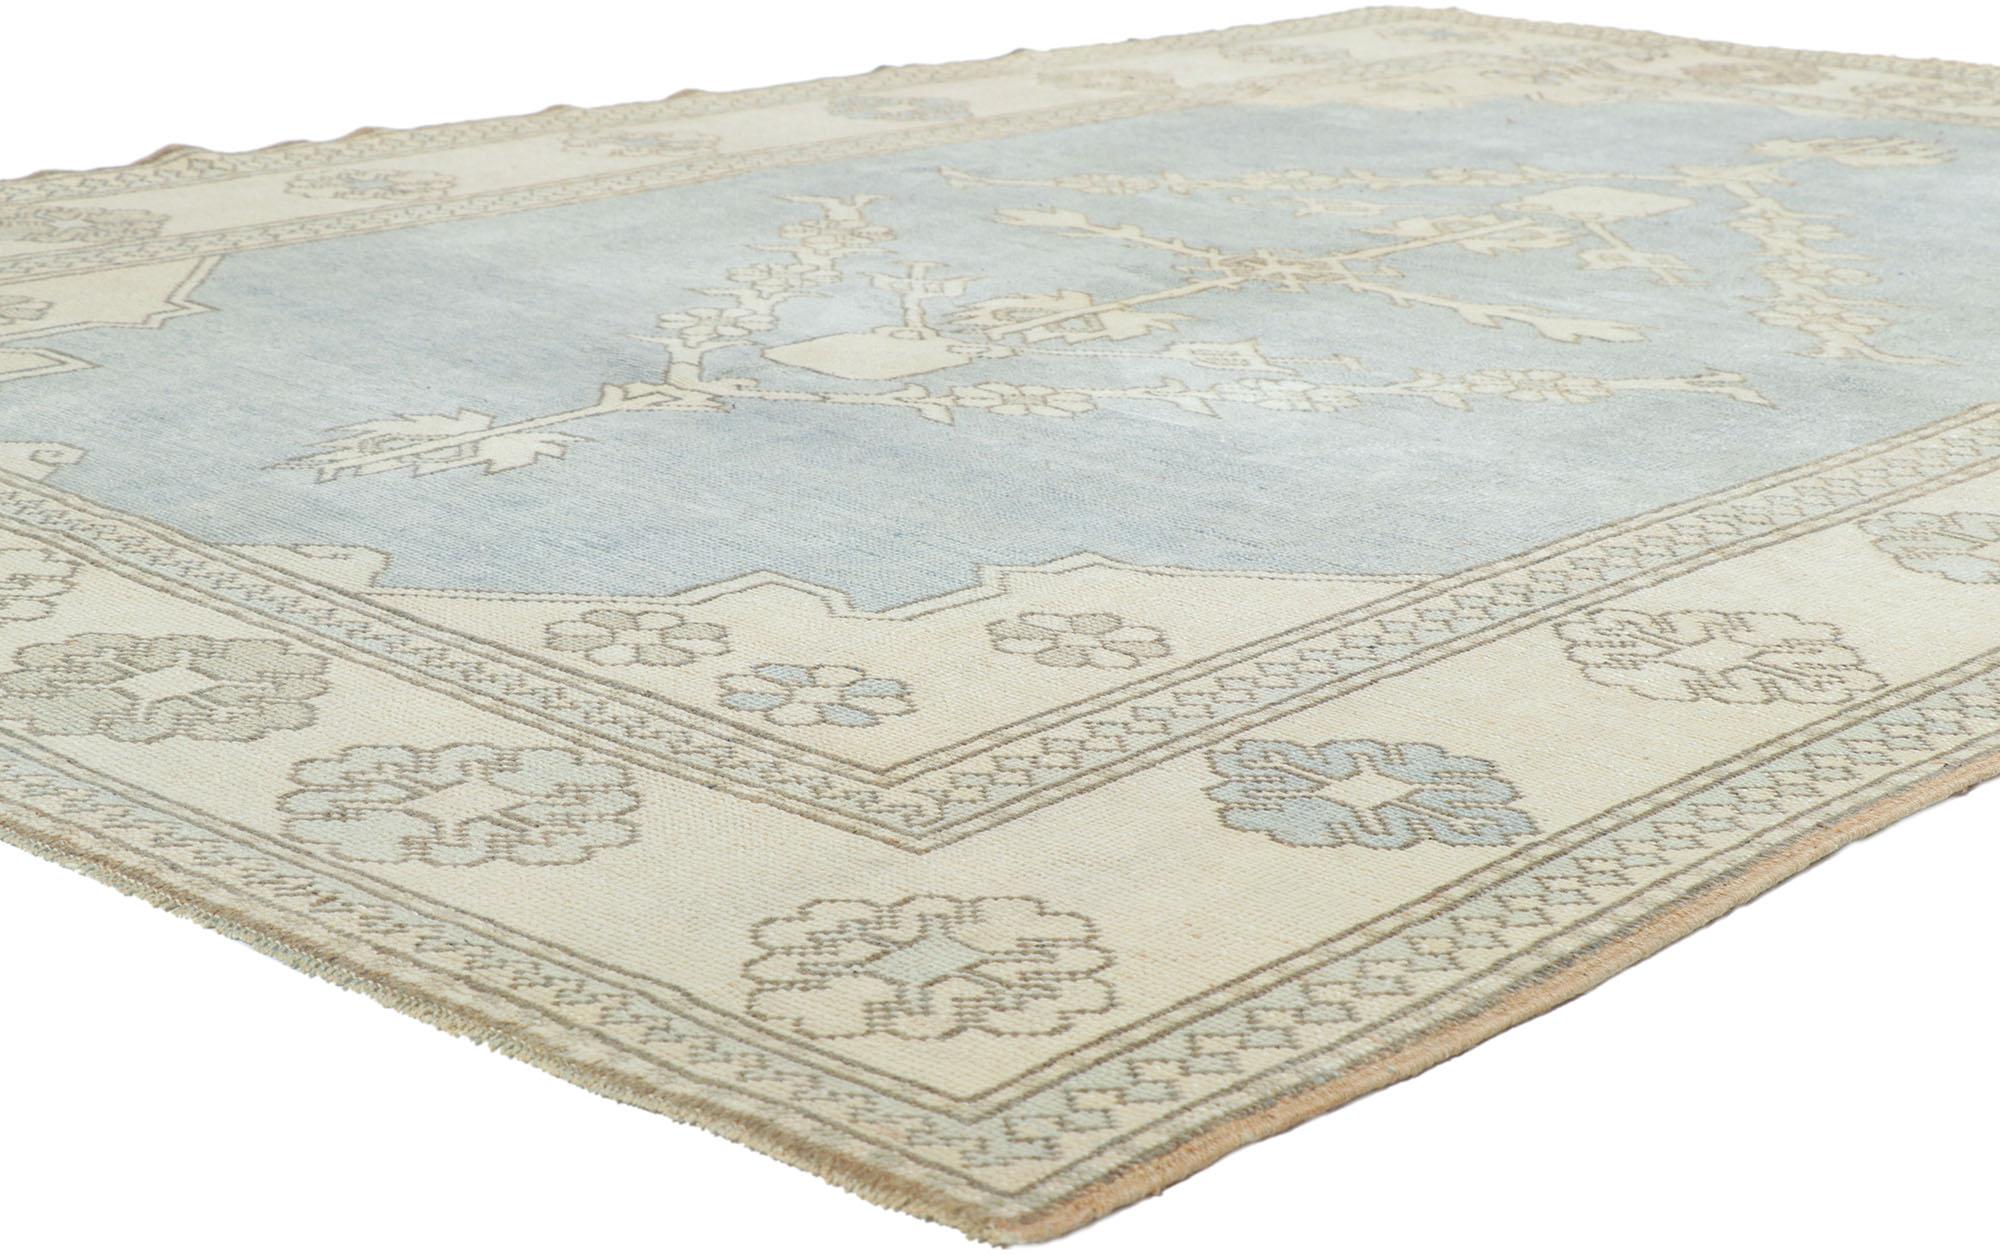 53772 Vintage Sky Blue Turkish Oushak Rug 07'00 x 09'05. Balancing traditional sensibility and relaxed style, this hand knotted wool vintage Turkish Oushak rug is poised to impress. The abrashed sky blue field showcases a botanical pole medallion